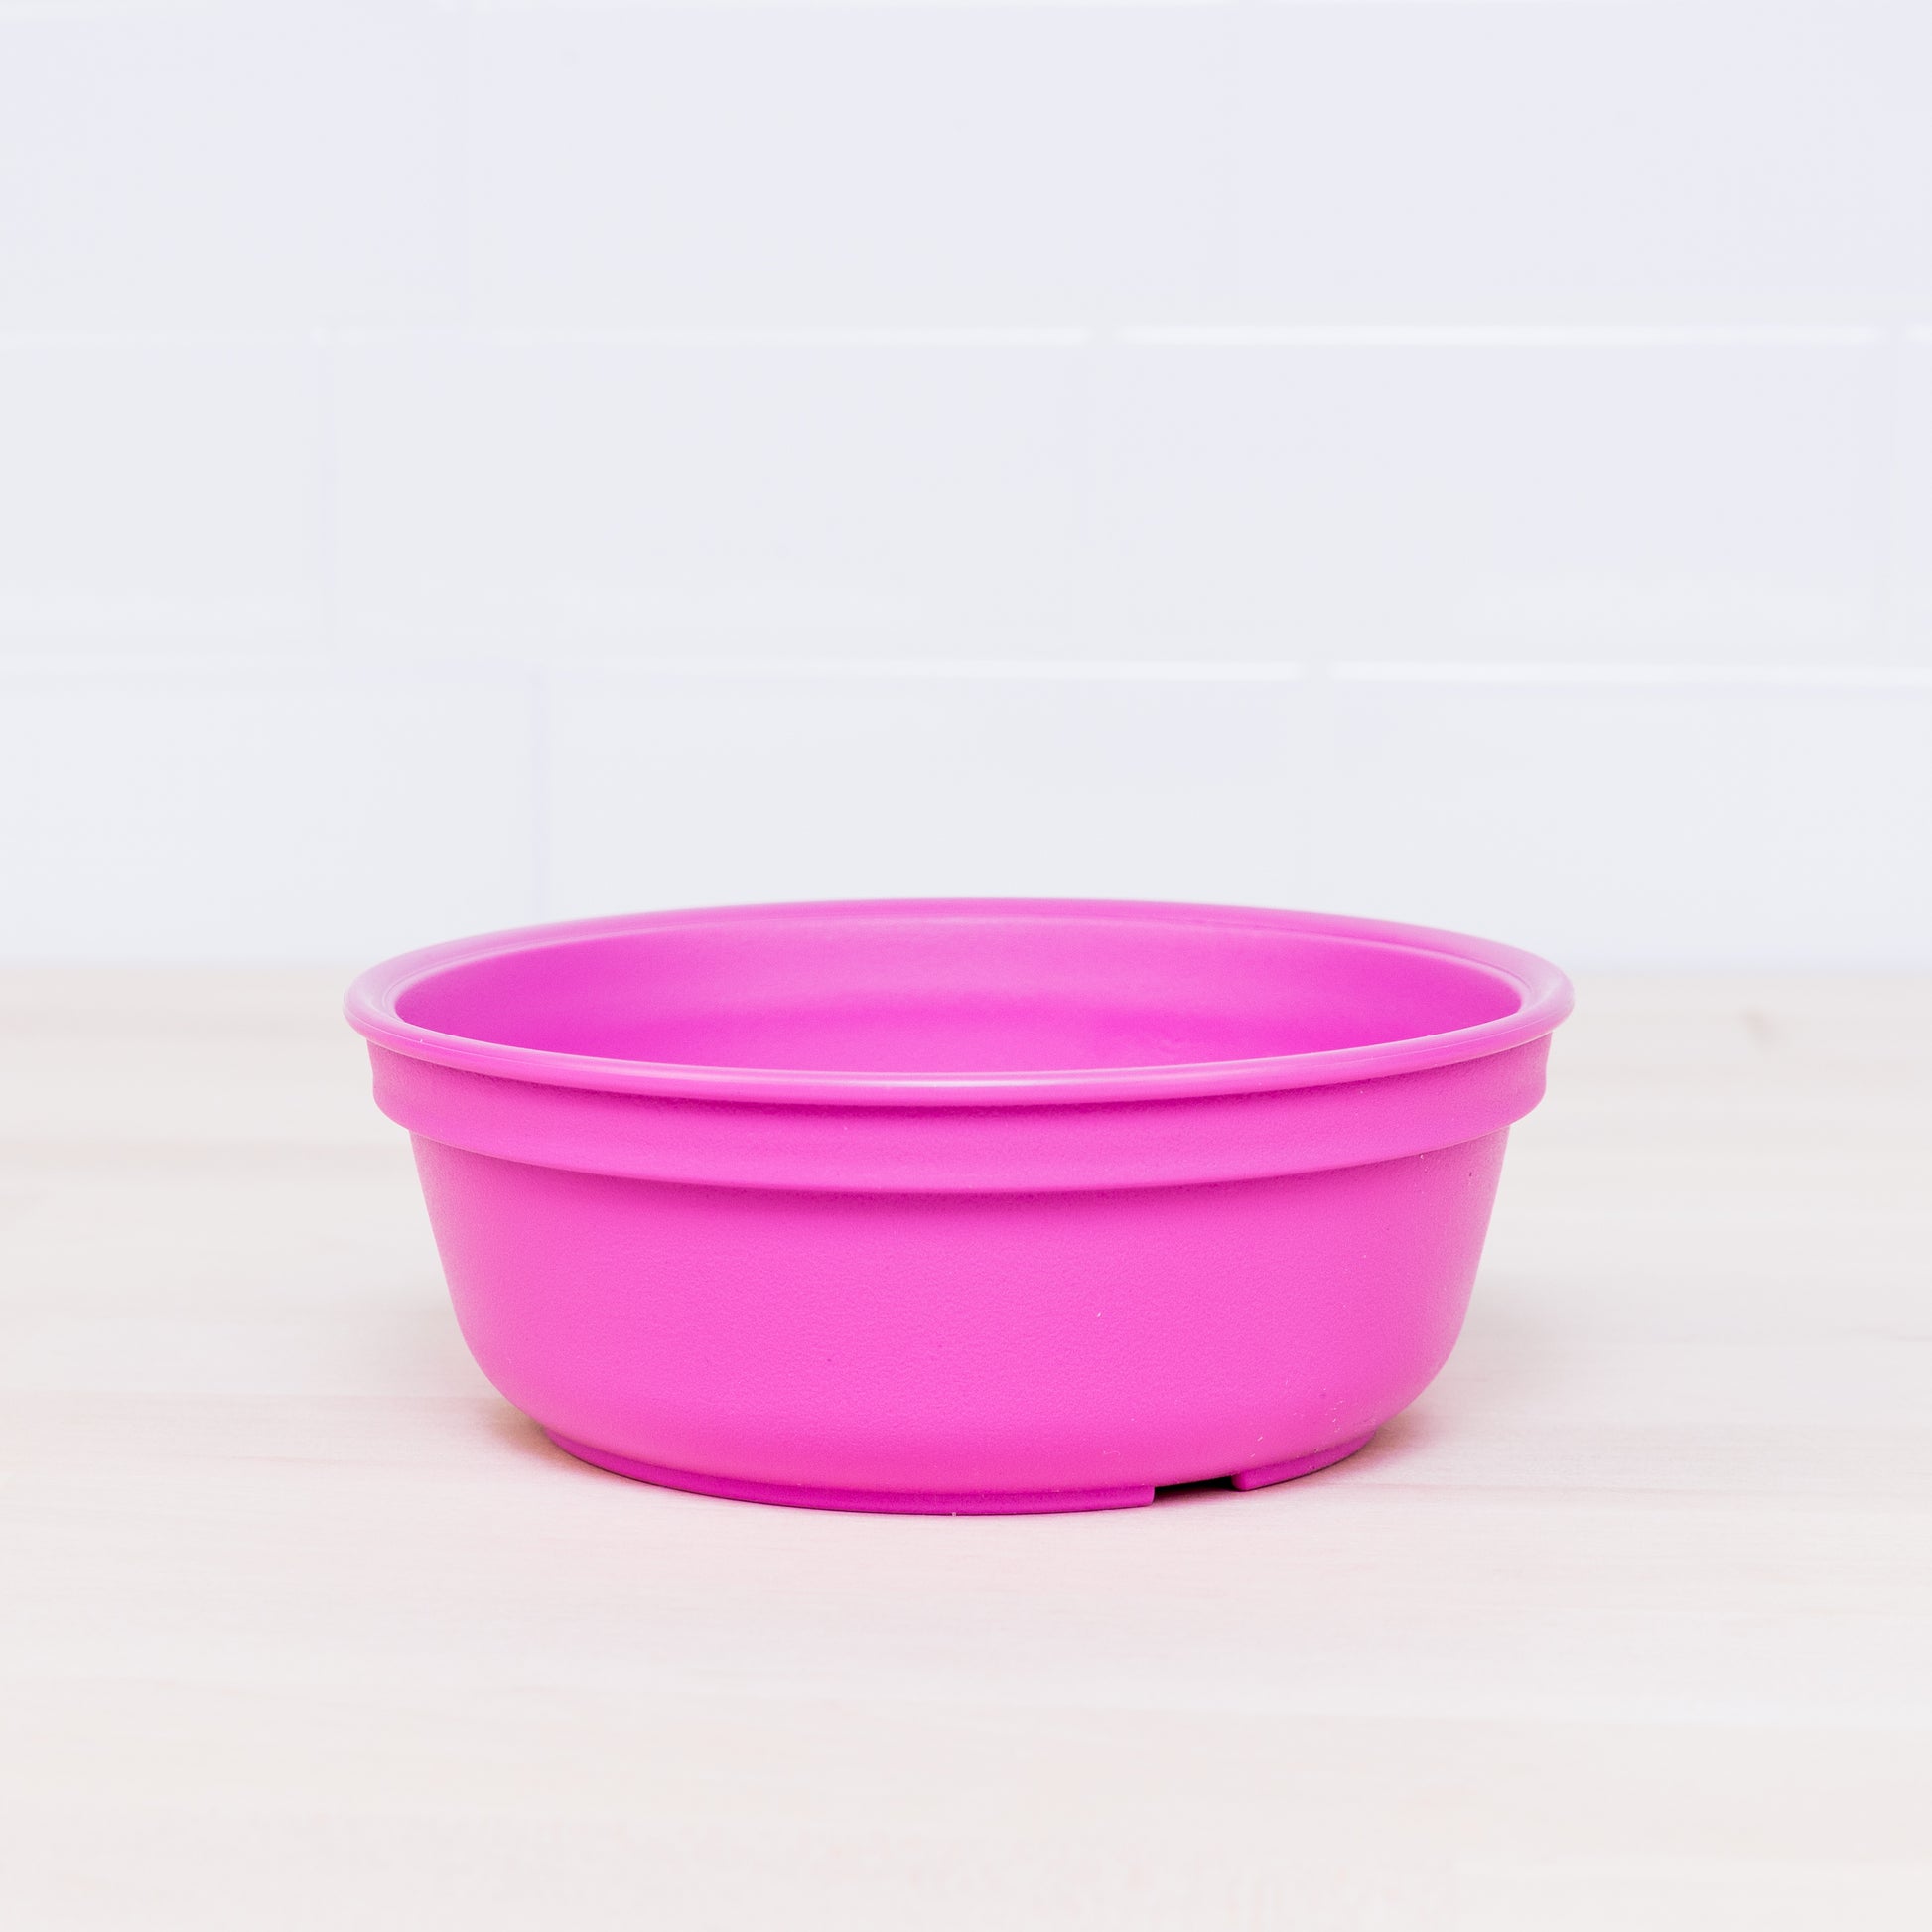 Re-Play Bowl | Standard Size in Bright Pink from Bear & Moo